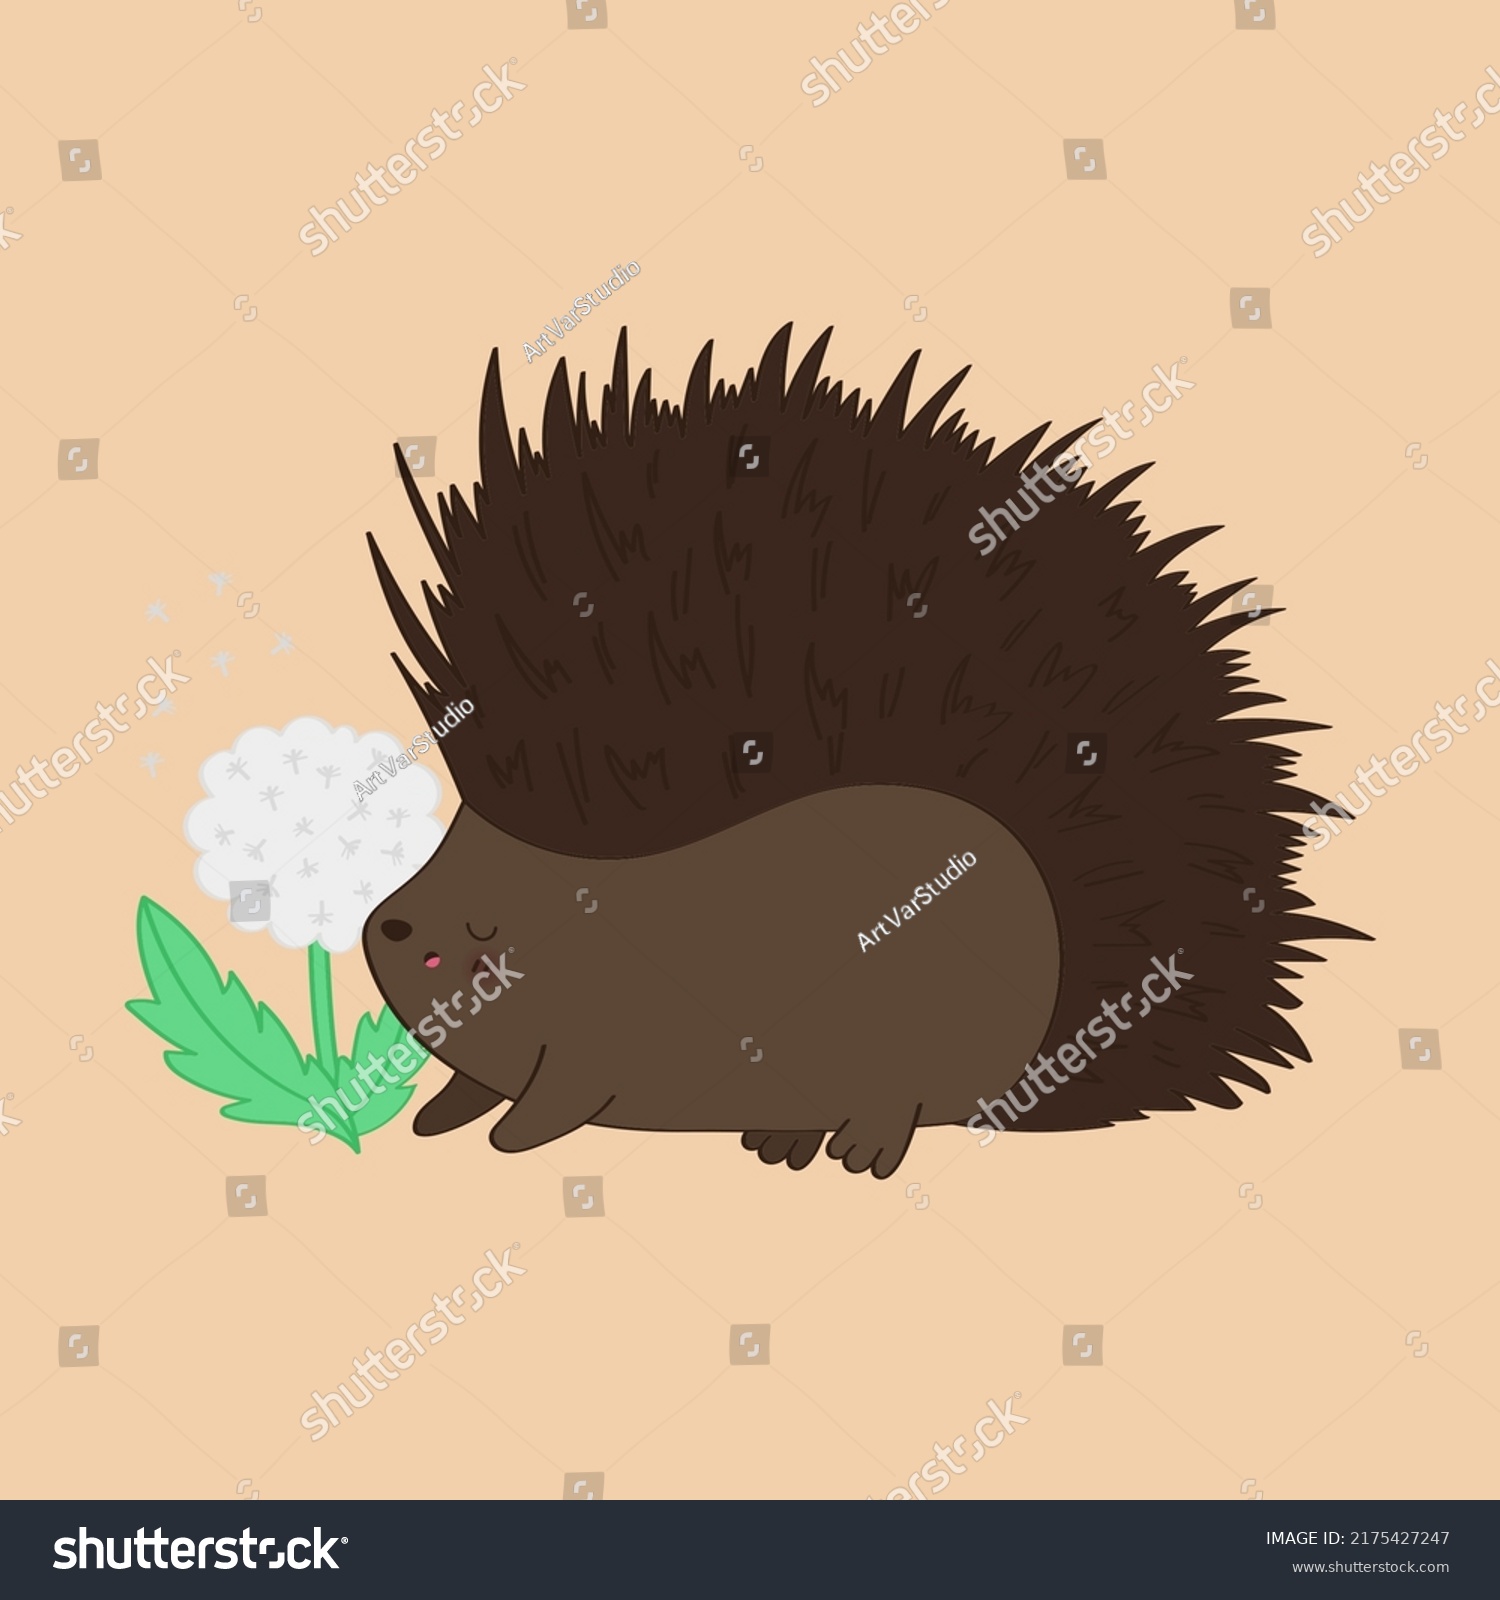 SVG of Hedgehog Clipart in Cute Cartoon Style Cute Clip Art Hedgehog with Dandelion. Vector Illustration of a Forest Animal for Stickers, Baby Shower Invitation, Prints for Clothes.  svg